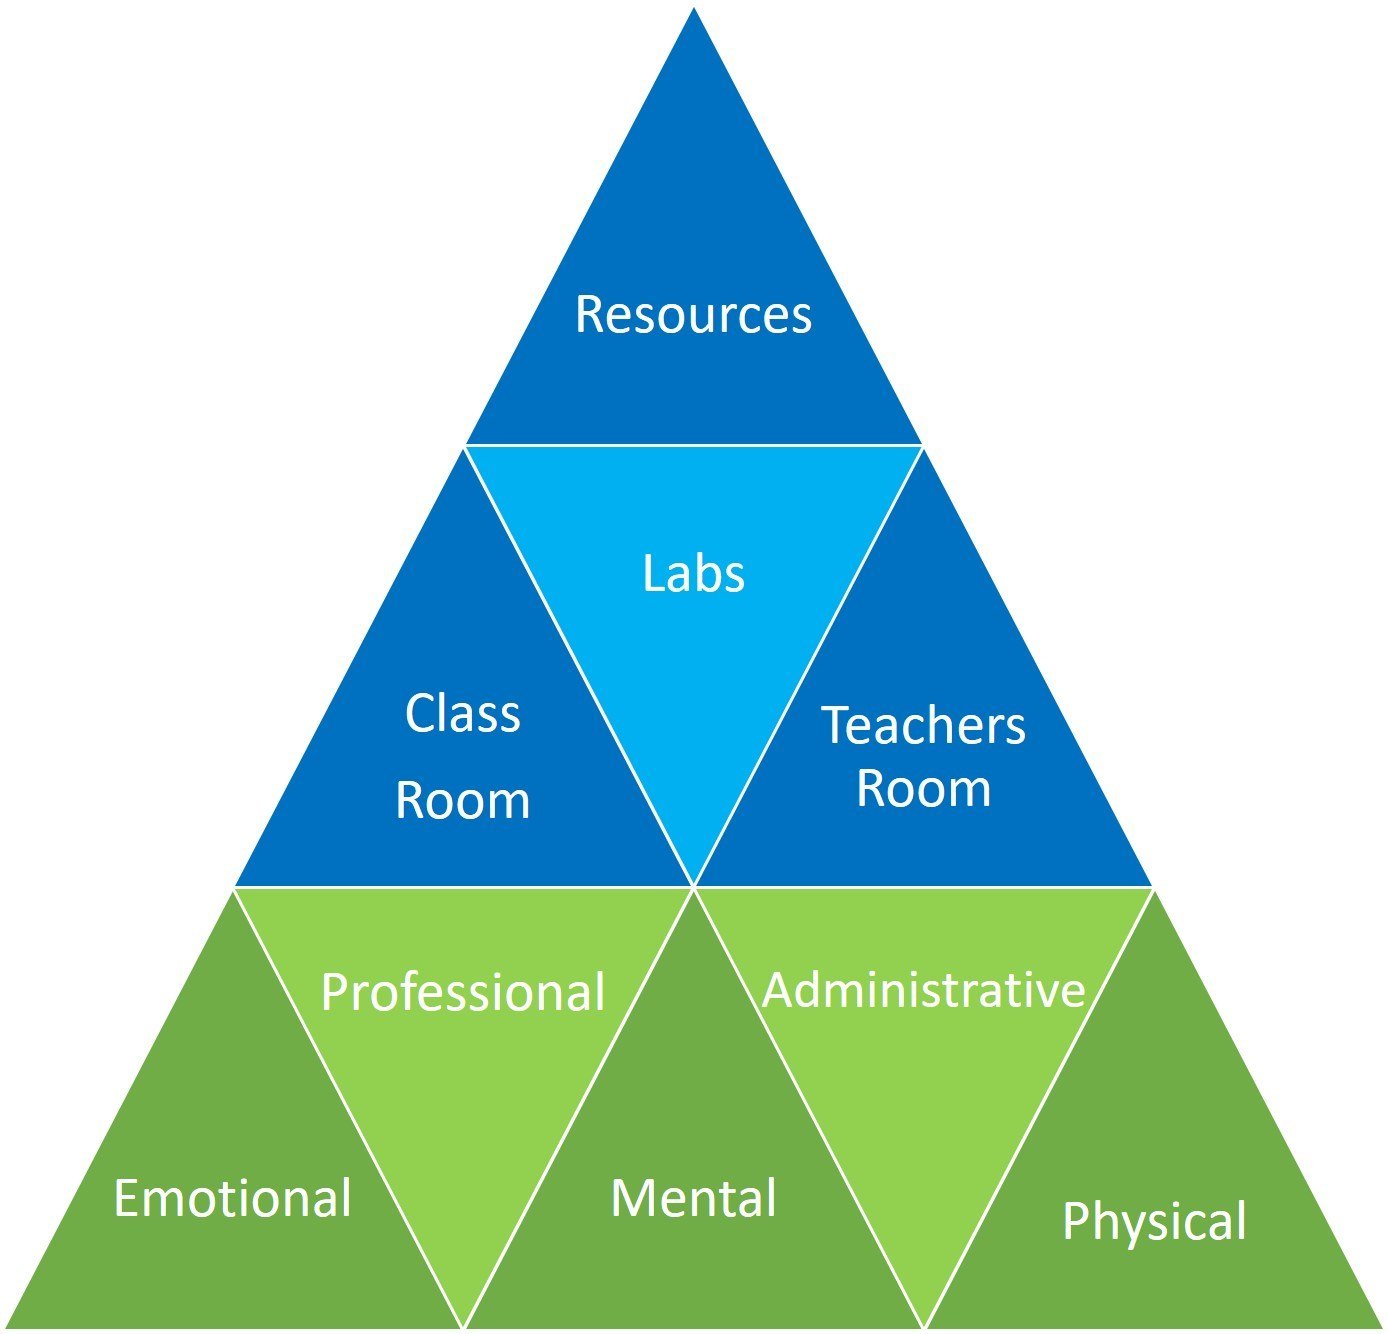 Support pyramid for teacher community (created by Asim Auti)